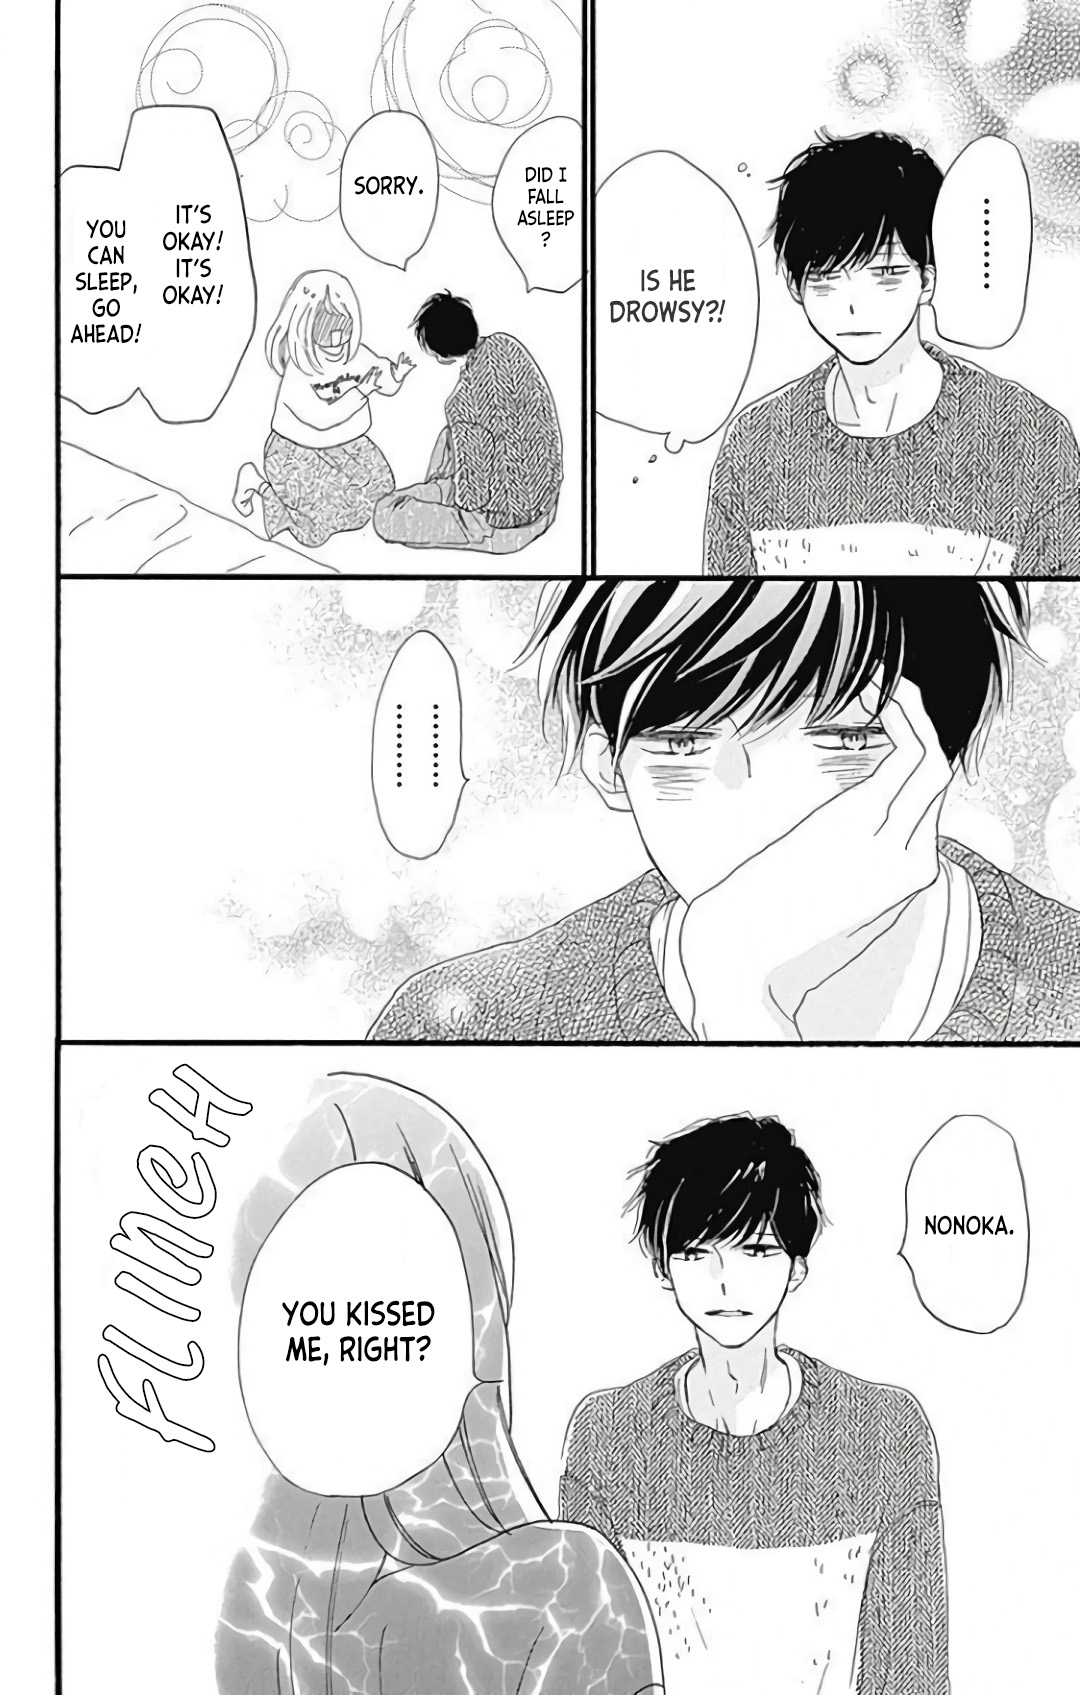 Where's My Lovely Sweetheart? Vol.5 Chapter 20